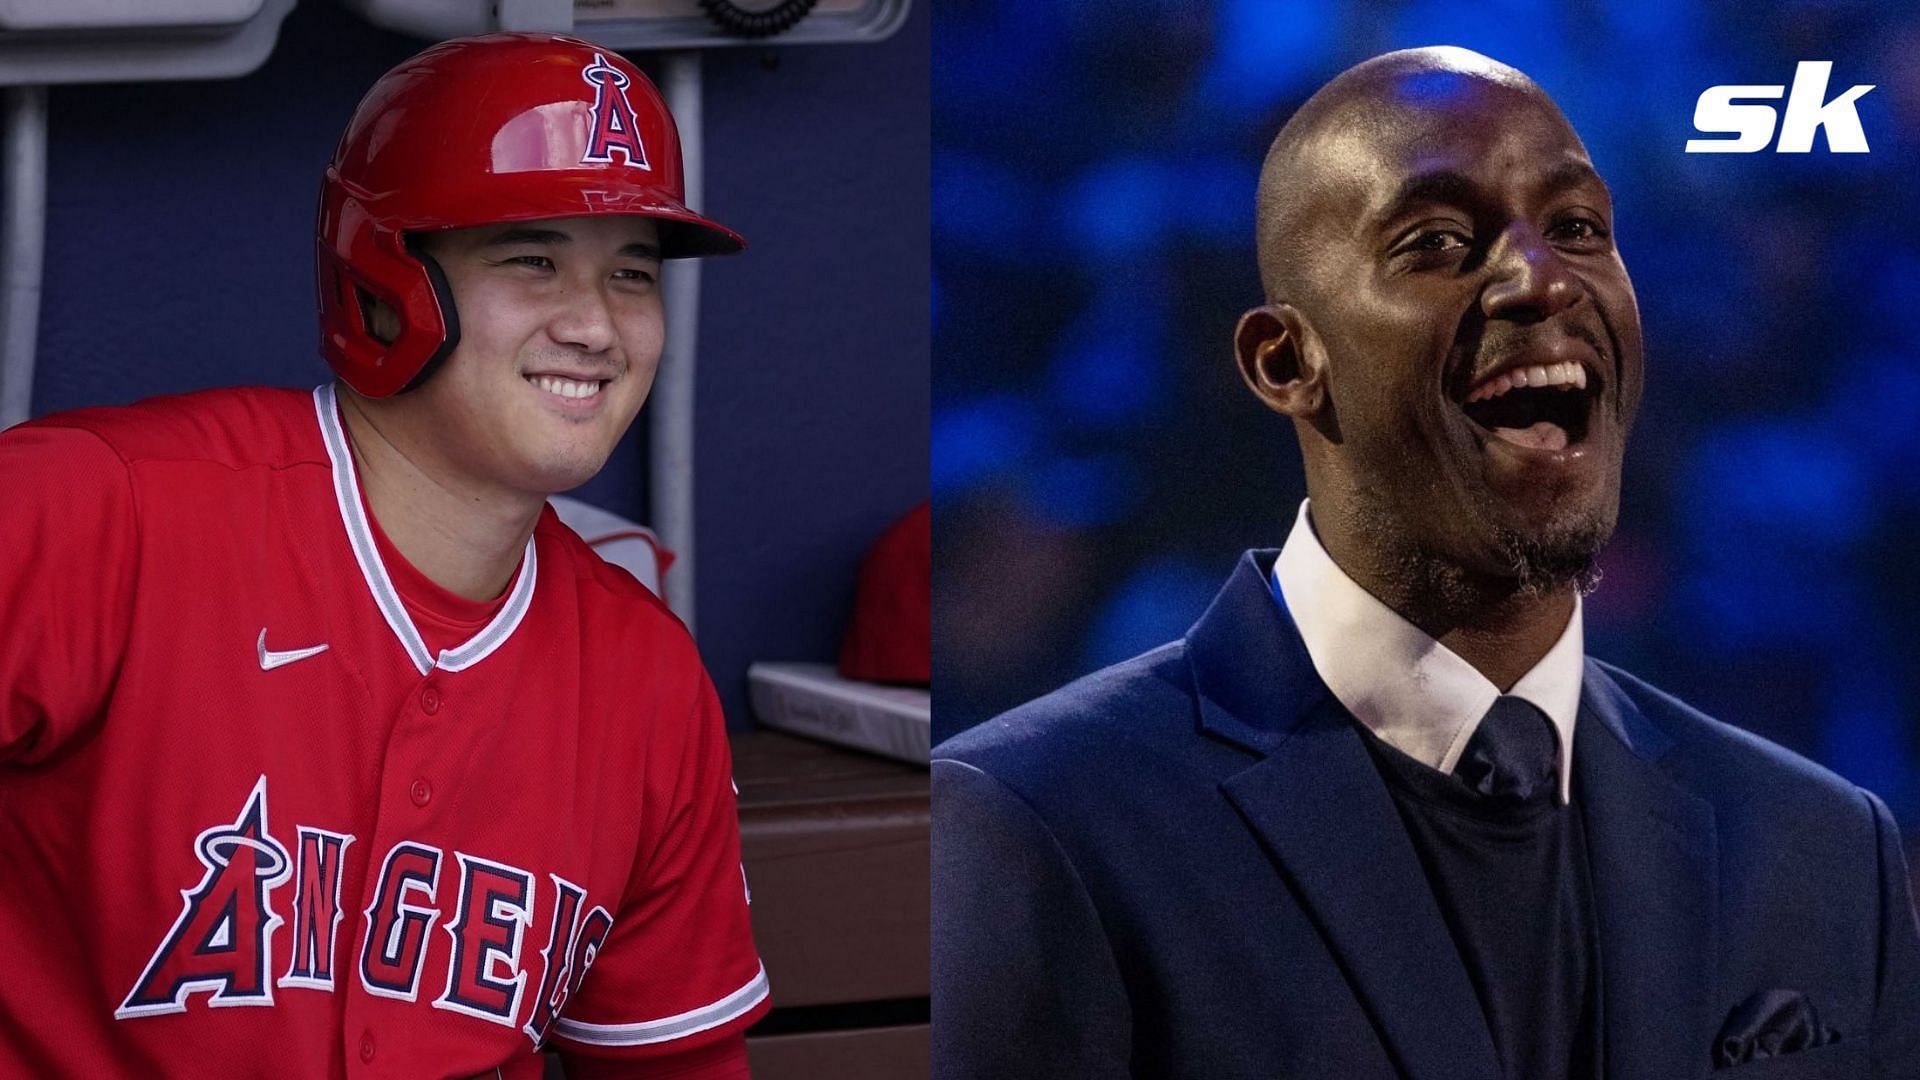 NBA legend Kevin Garnett questions why no American athlete can land a contract like Shohei Ohtani